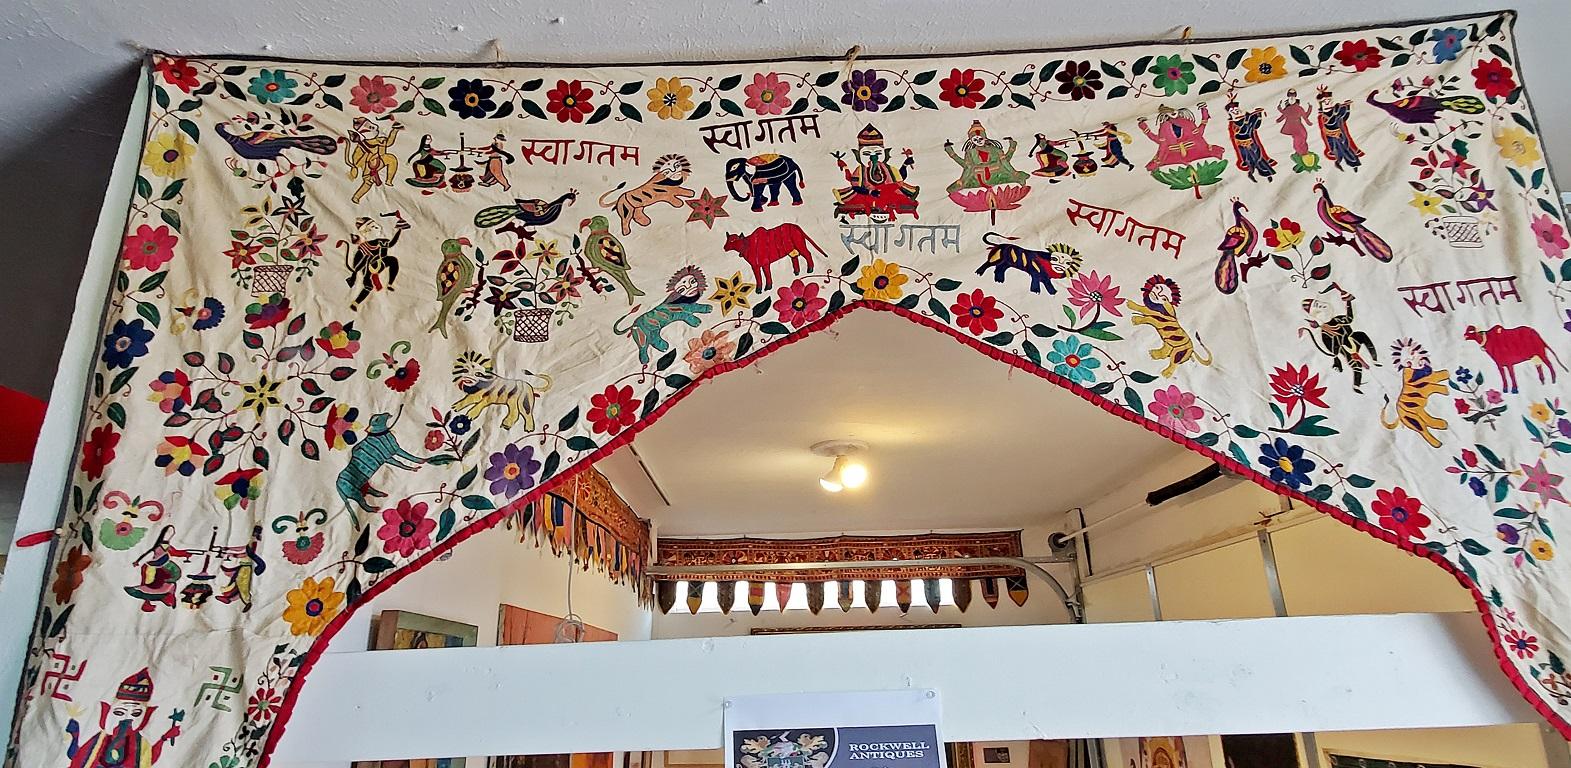 Presenting a lovely vintage Indian door tapestry.

Early 20th century, circa 1920.

Probably from Central India.

Made of cotton and handstitched or embroidered with various native Indian images of cattle, tigers, elephants, birds. Also